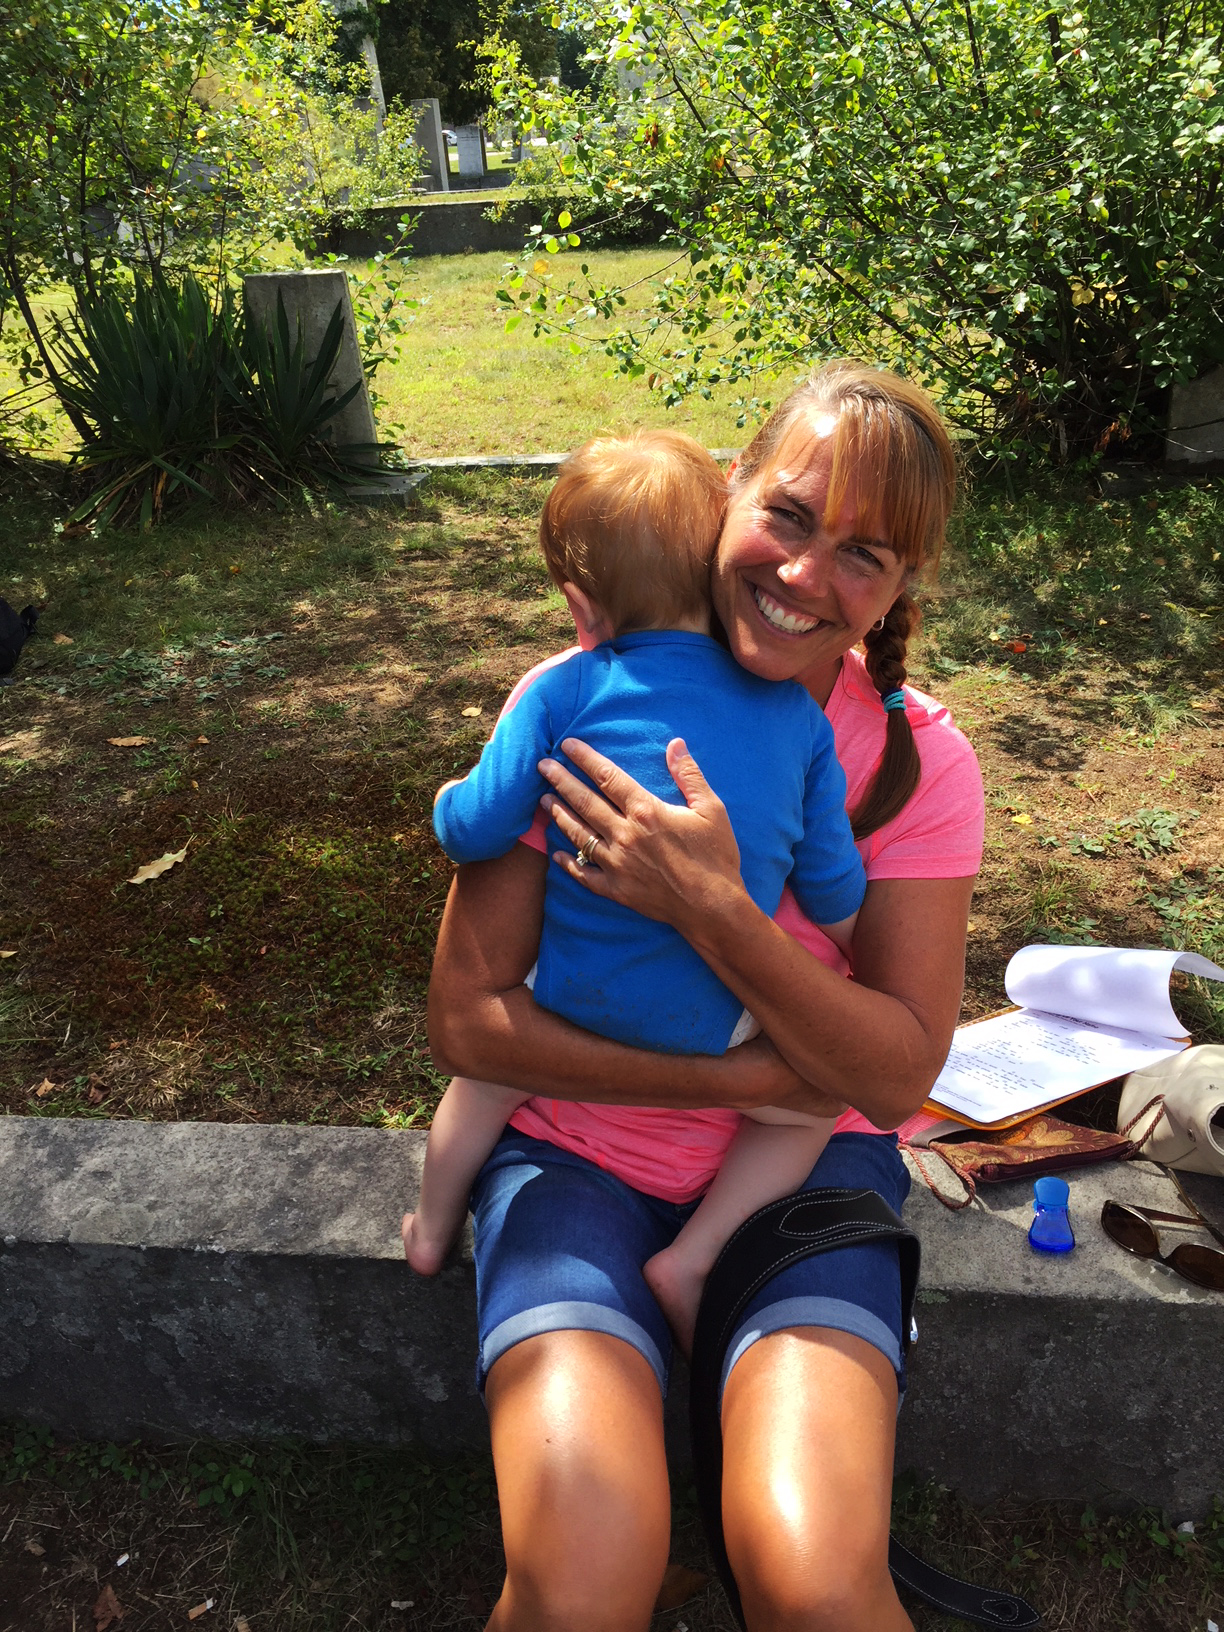 Dawn Longval hugging toddler in the park during summer.